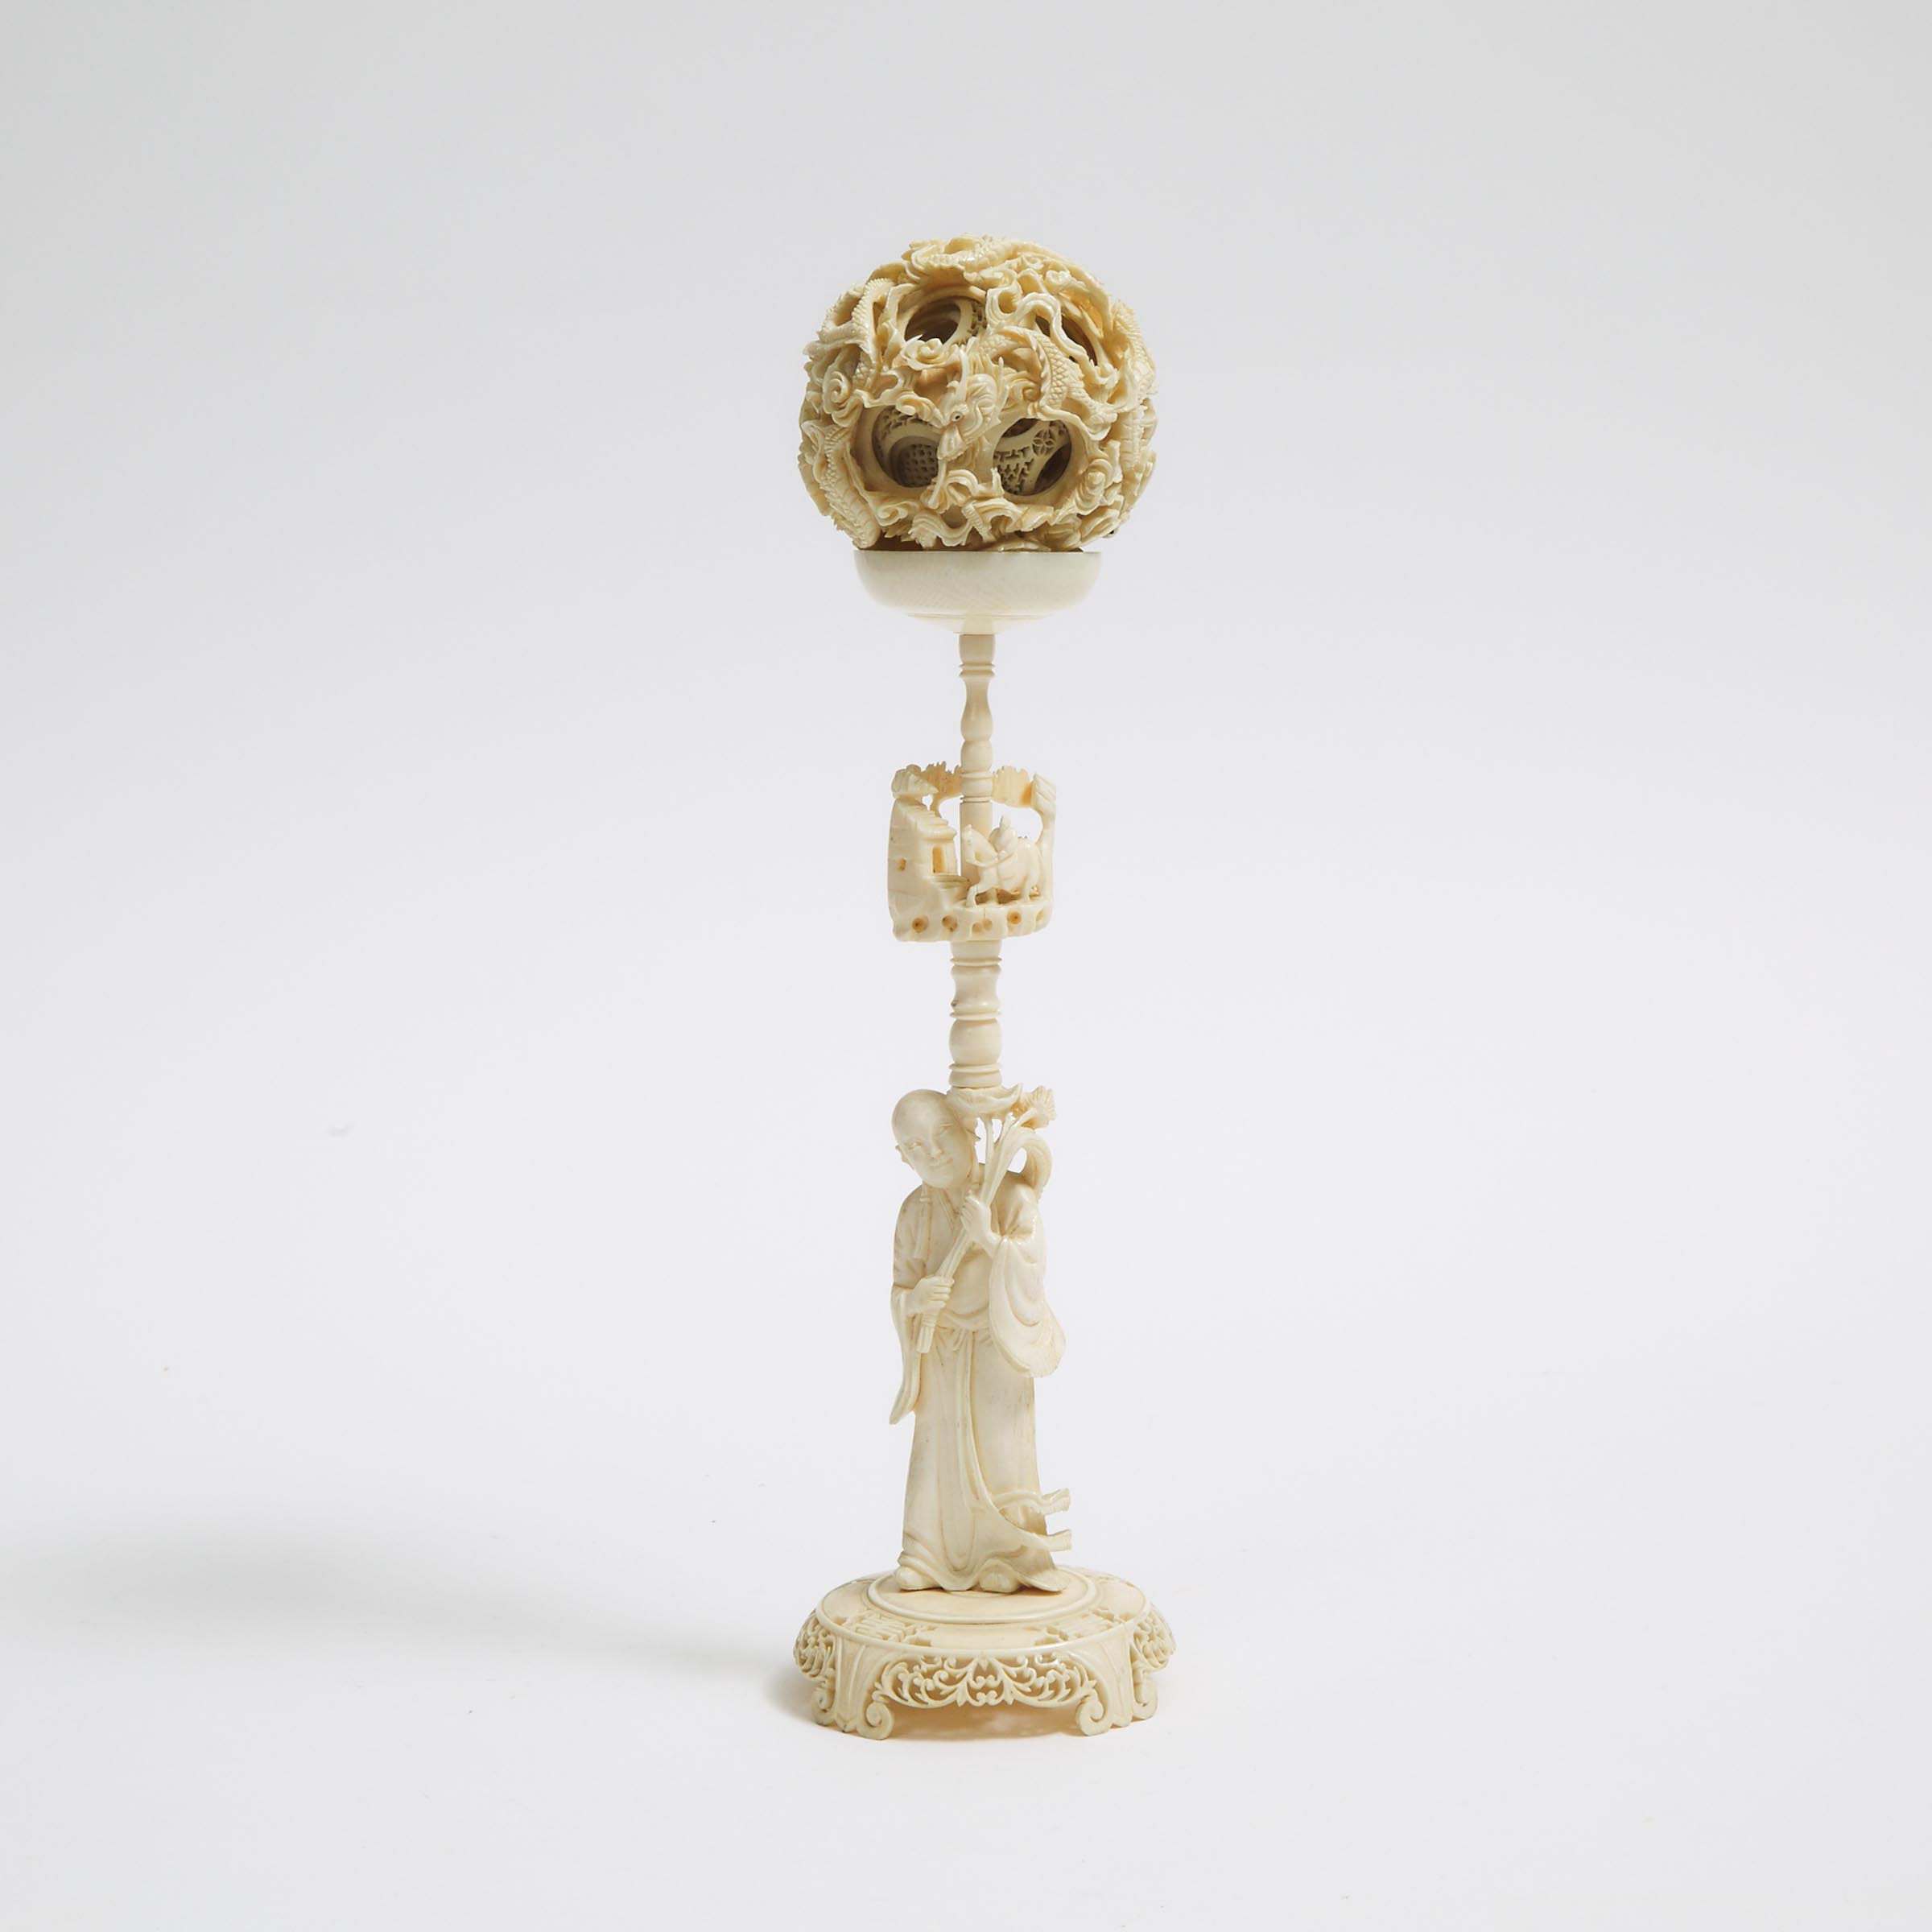 A Chinese Ivory Puzzle Ball and Stand, Early 20th Century